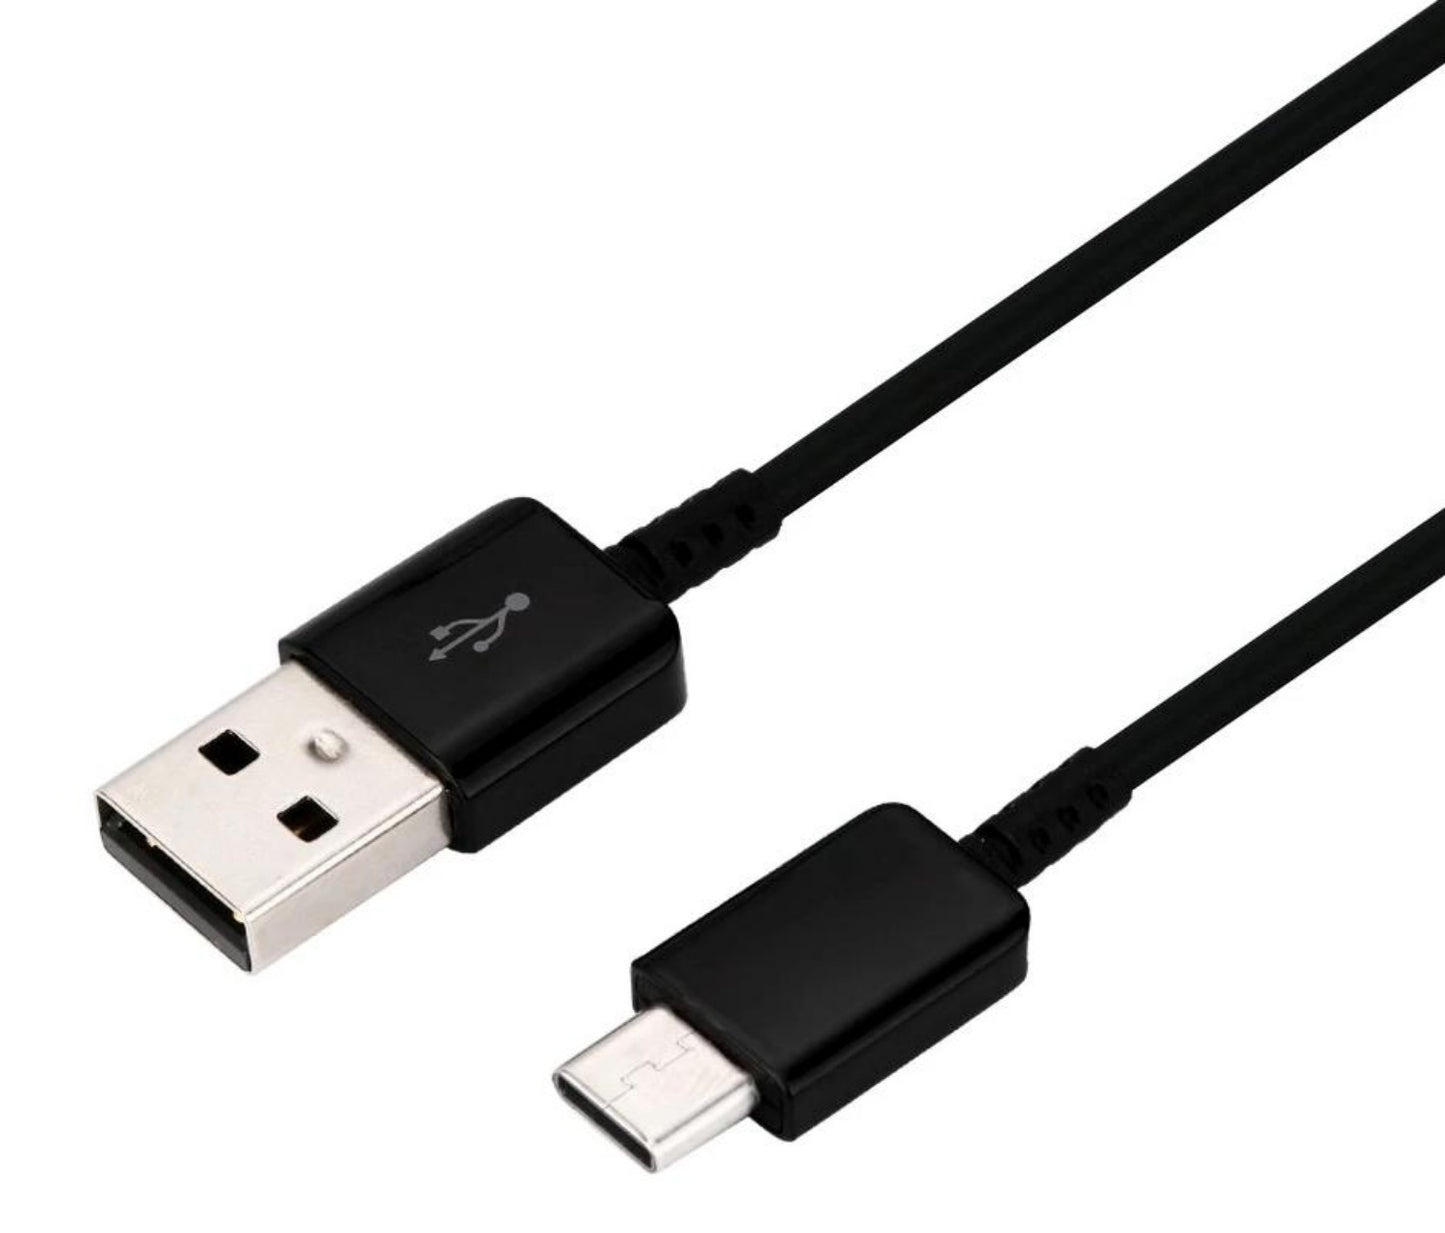 1-meter length Type-C to USB cable